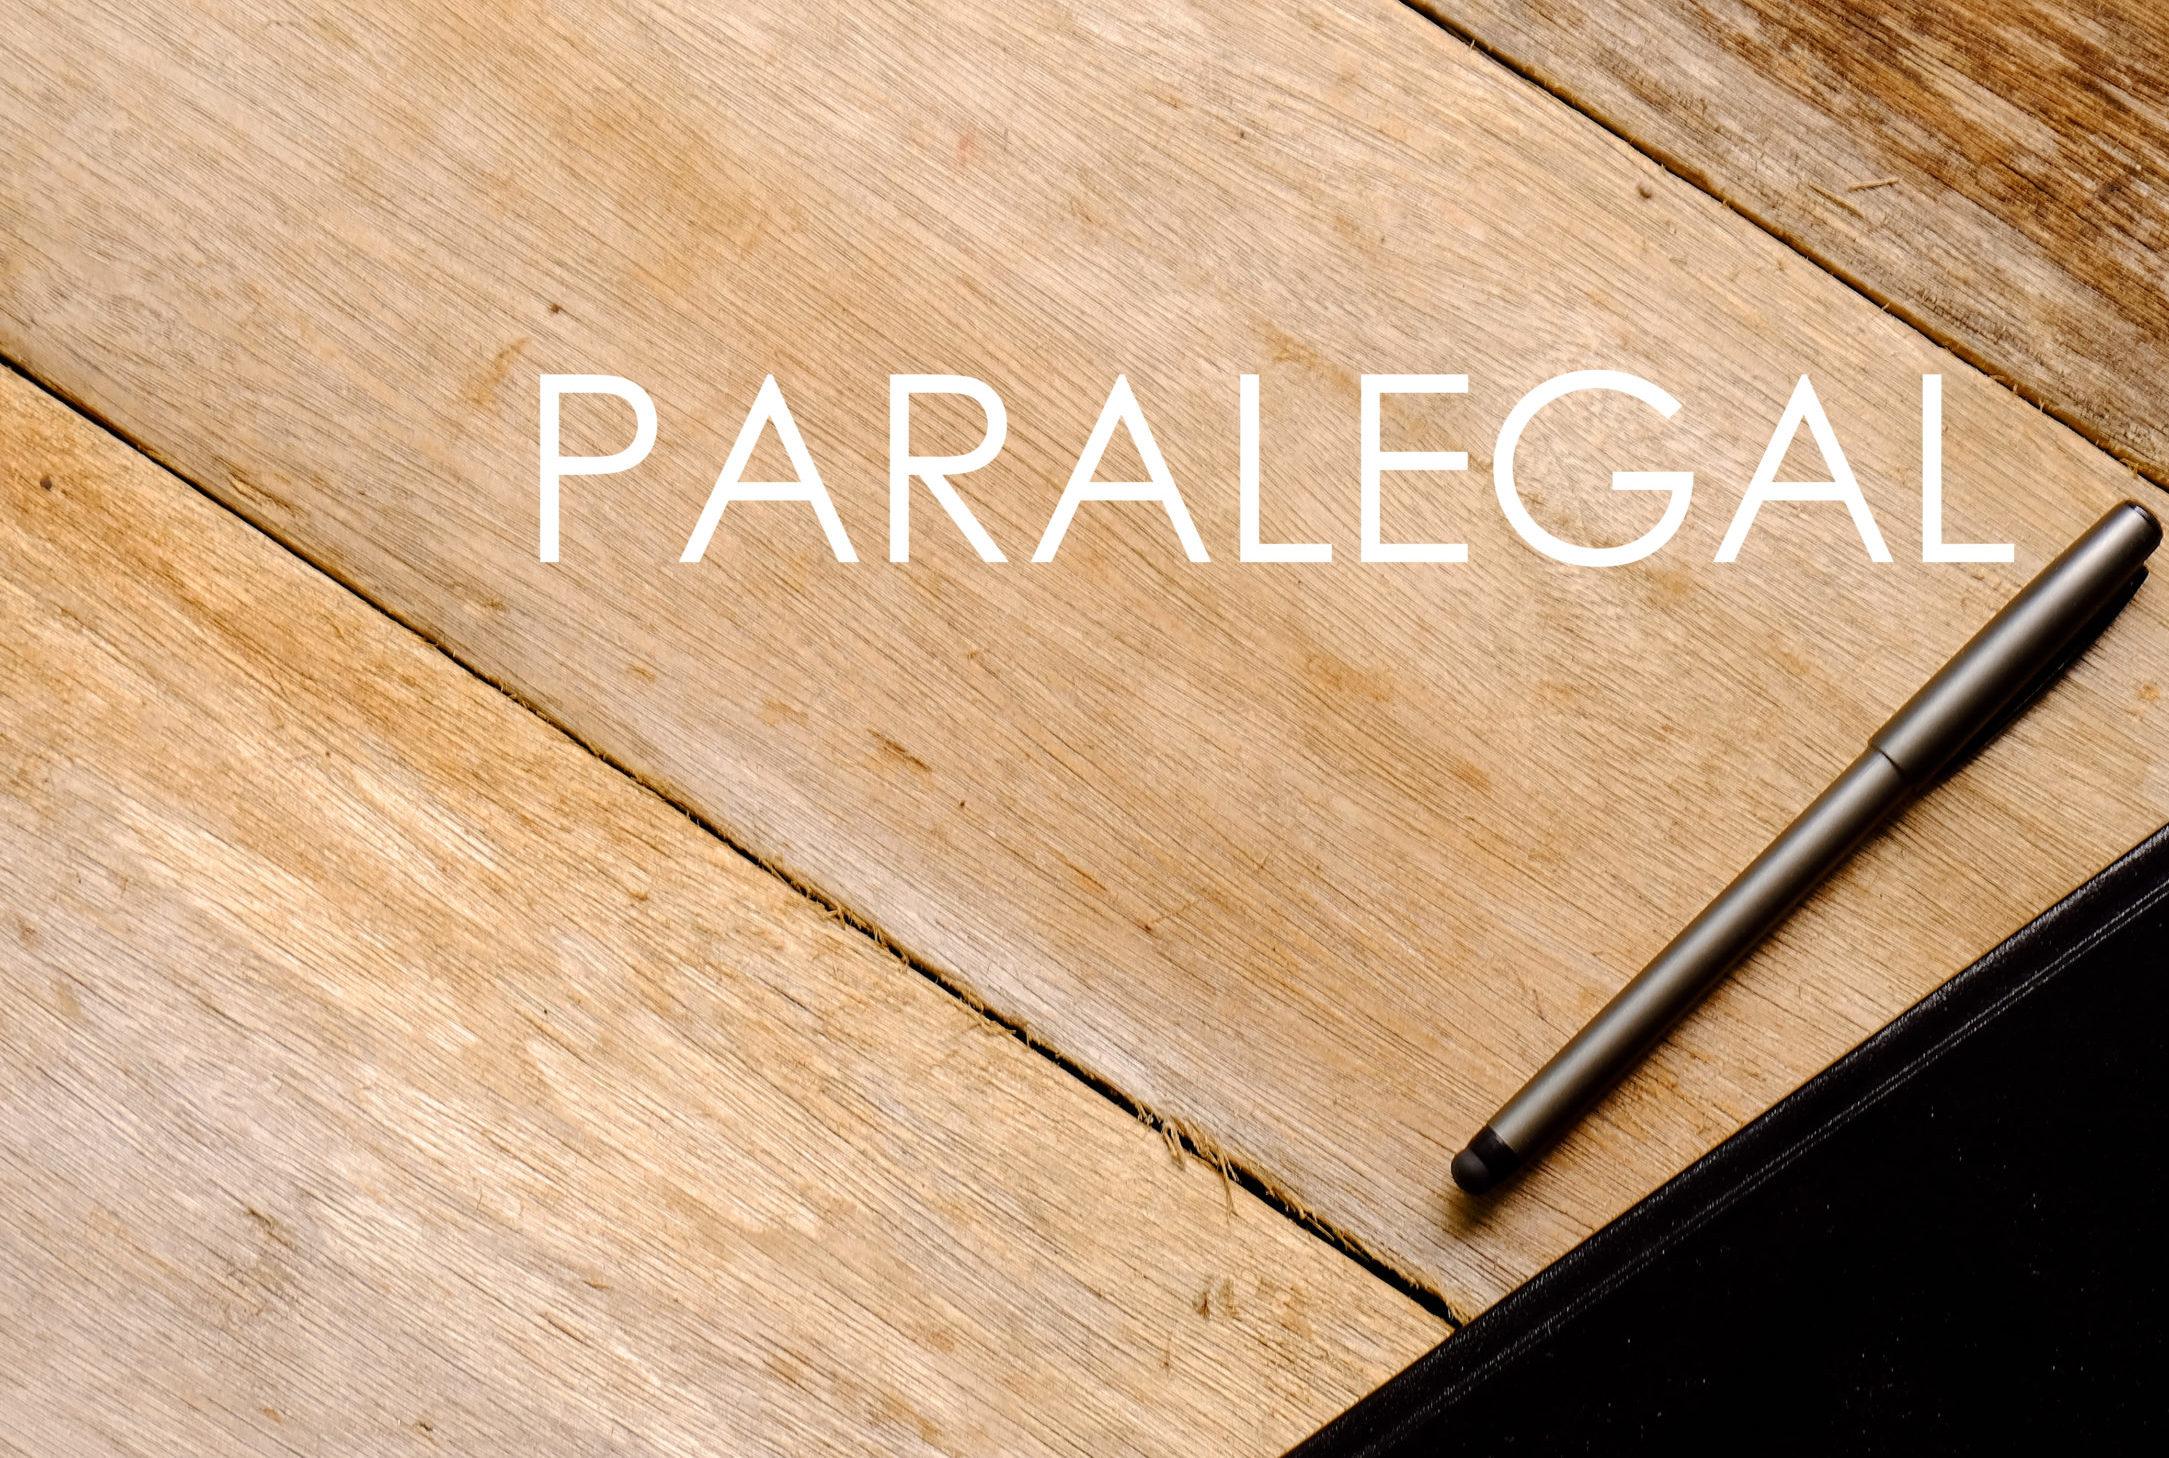 What Can I Do With a Paralegal Associate Degree?